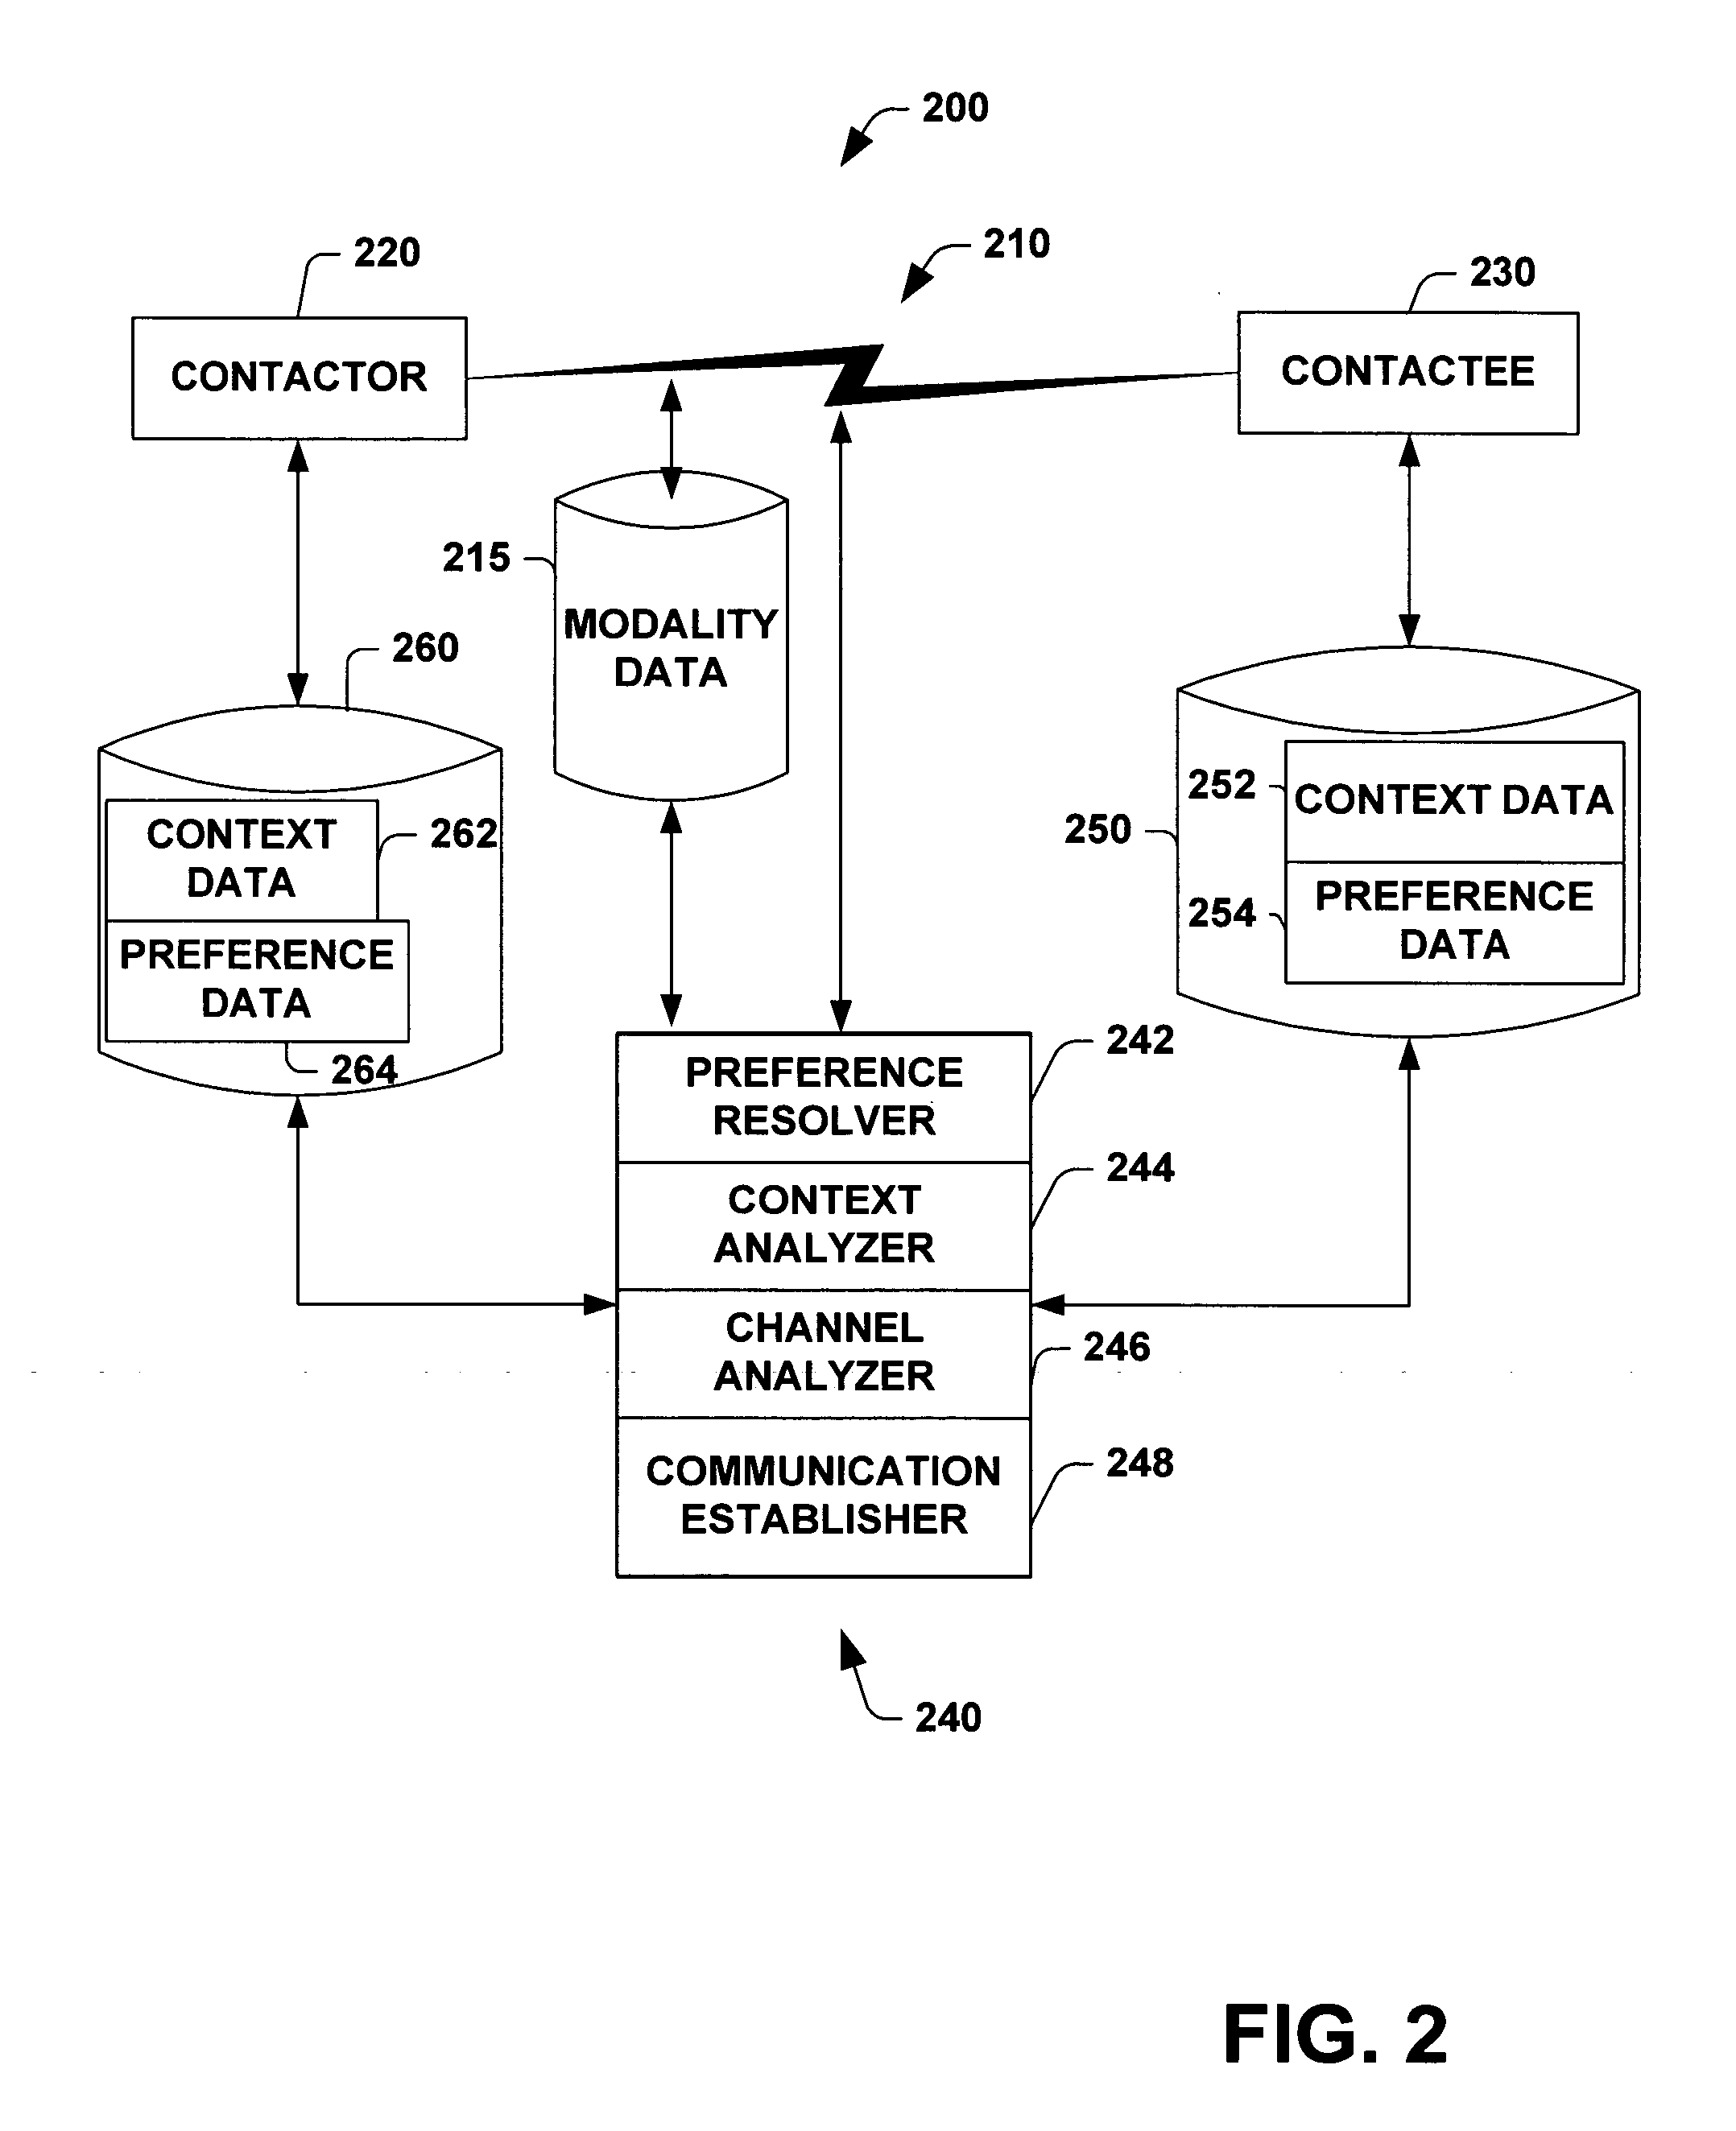 System and method for identifying and establishing preferred modalities or channels for communications based on participants' preferences and contexts